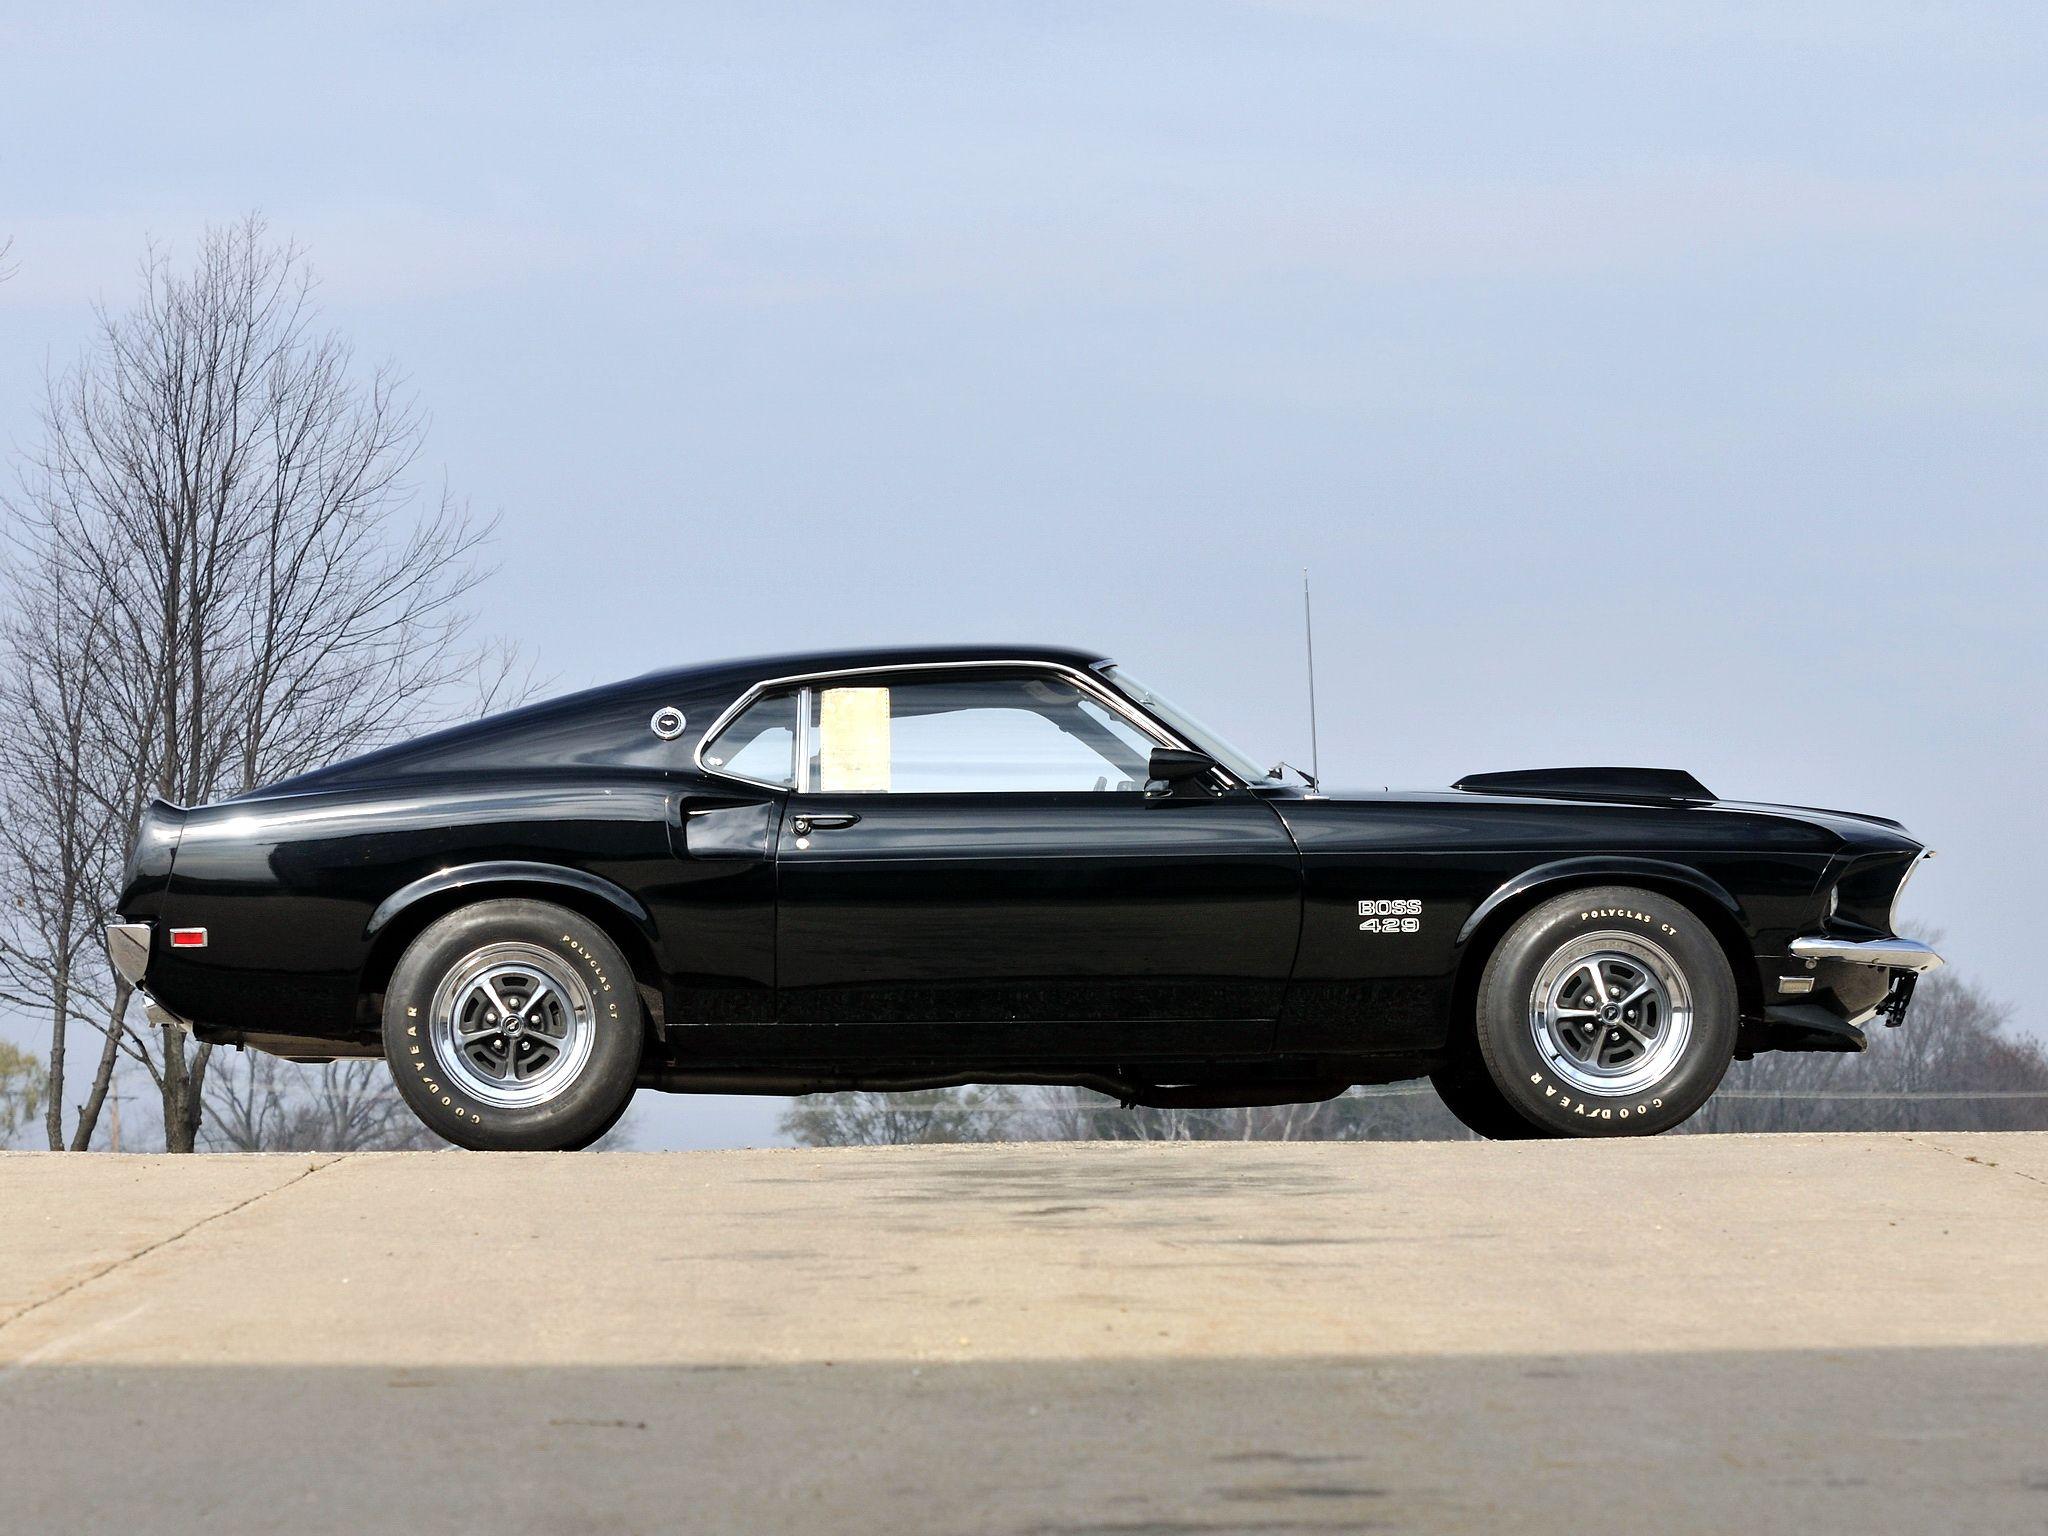 Mustang Boss 429 ford muscle classic g wallpaperx1536